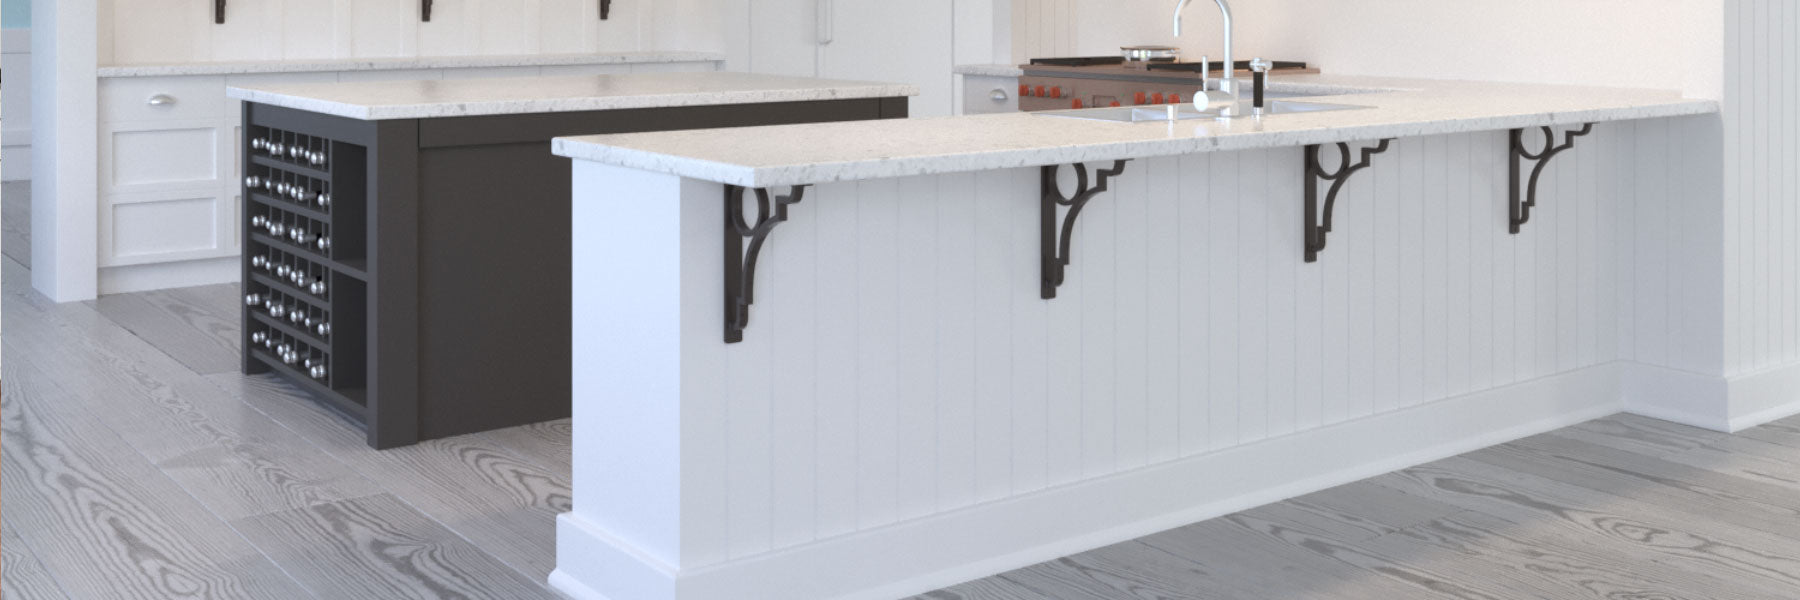 Decorative Iron Corbels supporting a large granite countertop overhang on this kitchen peninsula. 